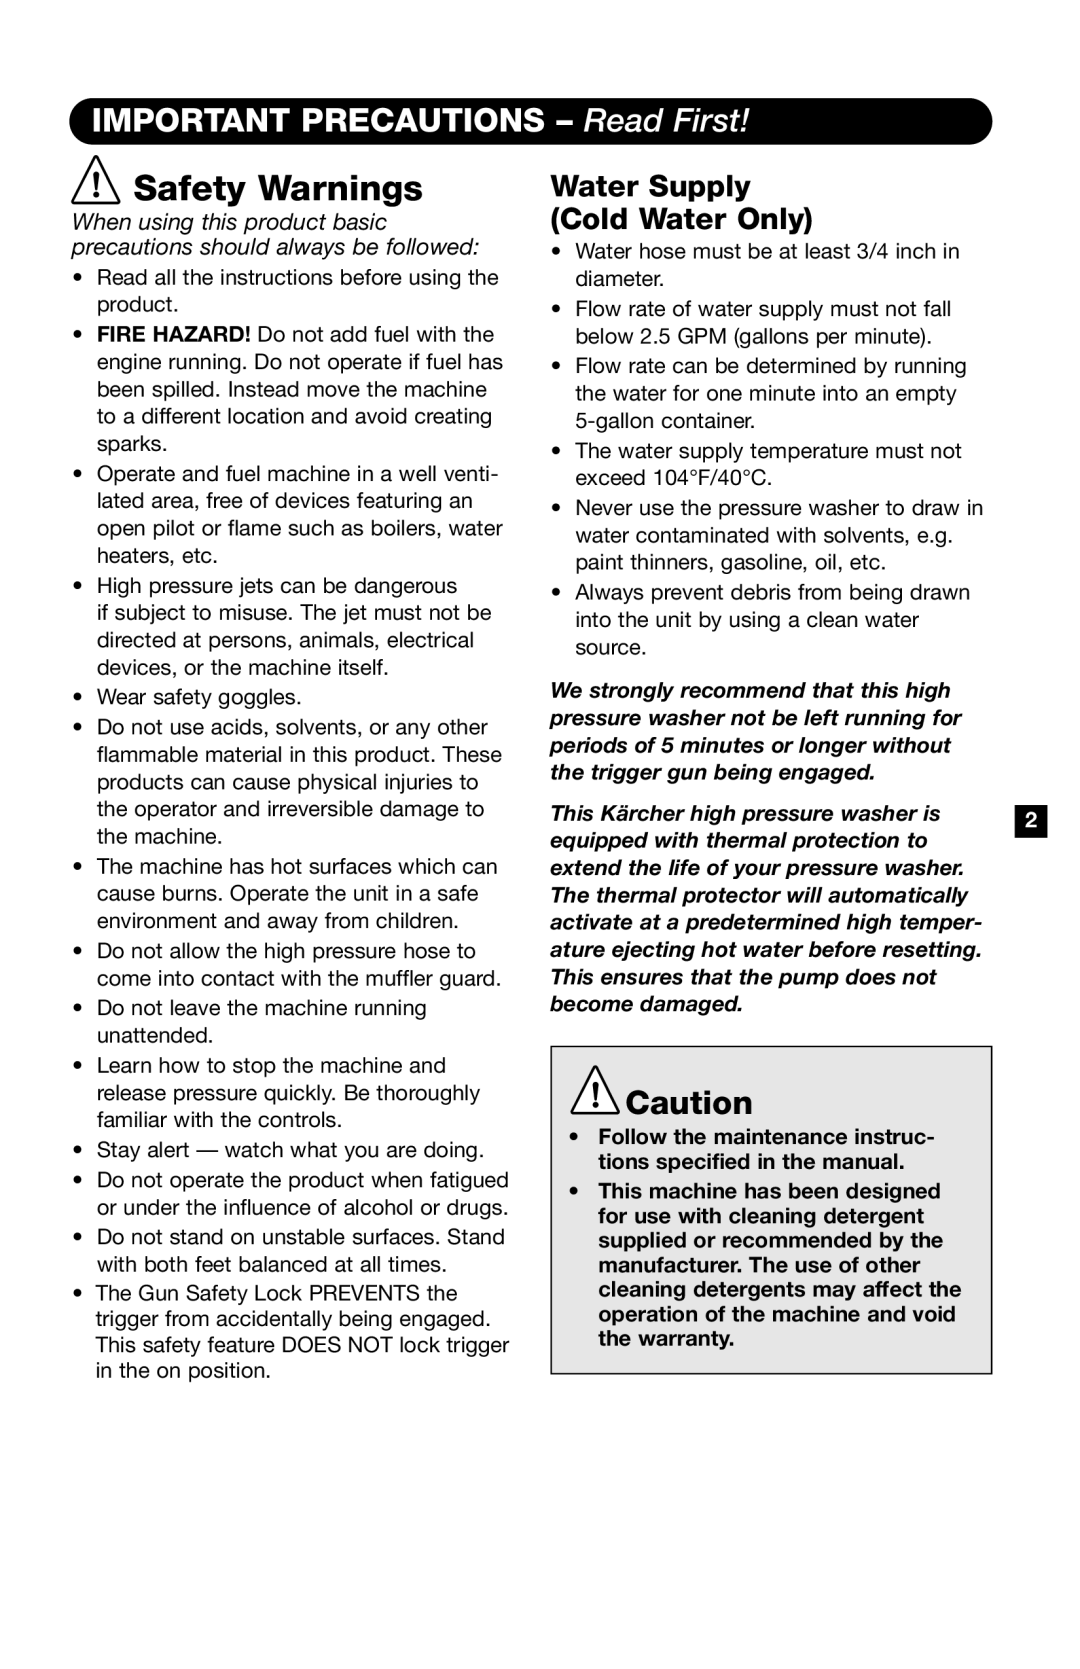 Karcher K4400G operating instructions IMPORTANT PRECAUTIONS - Read First, Water Supply Cold Water Only, Safety Warnings 